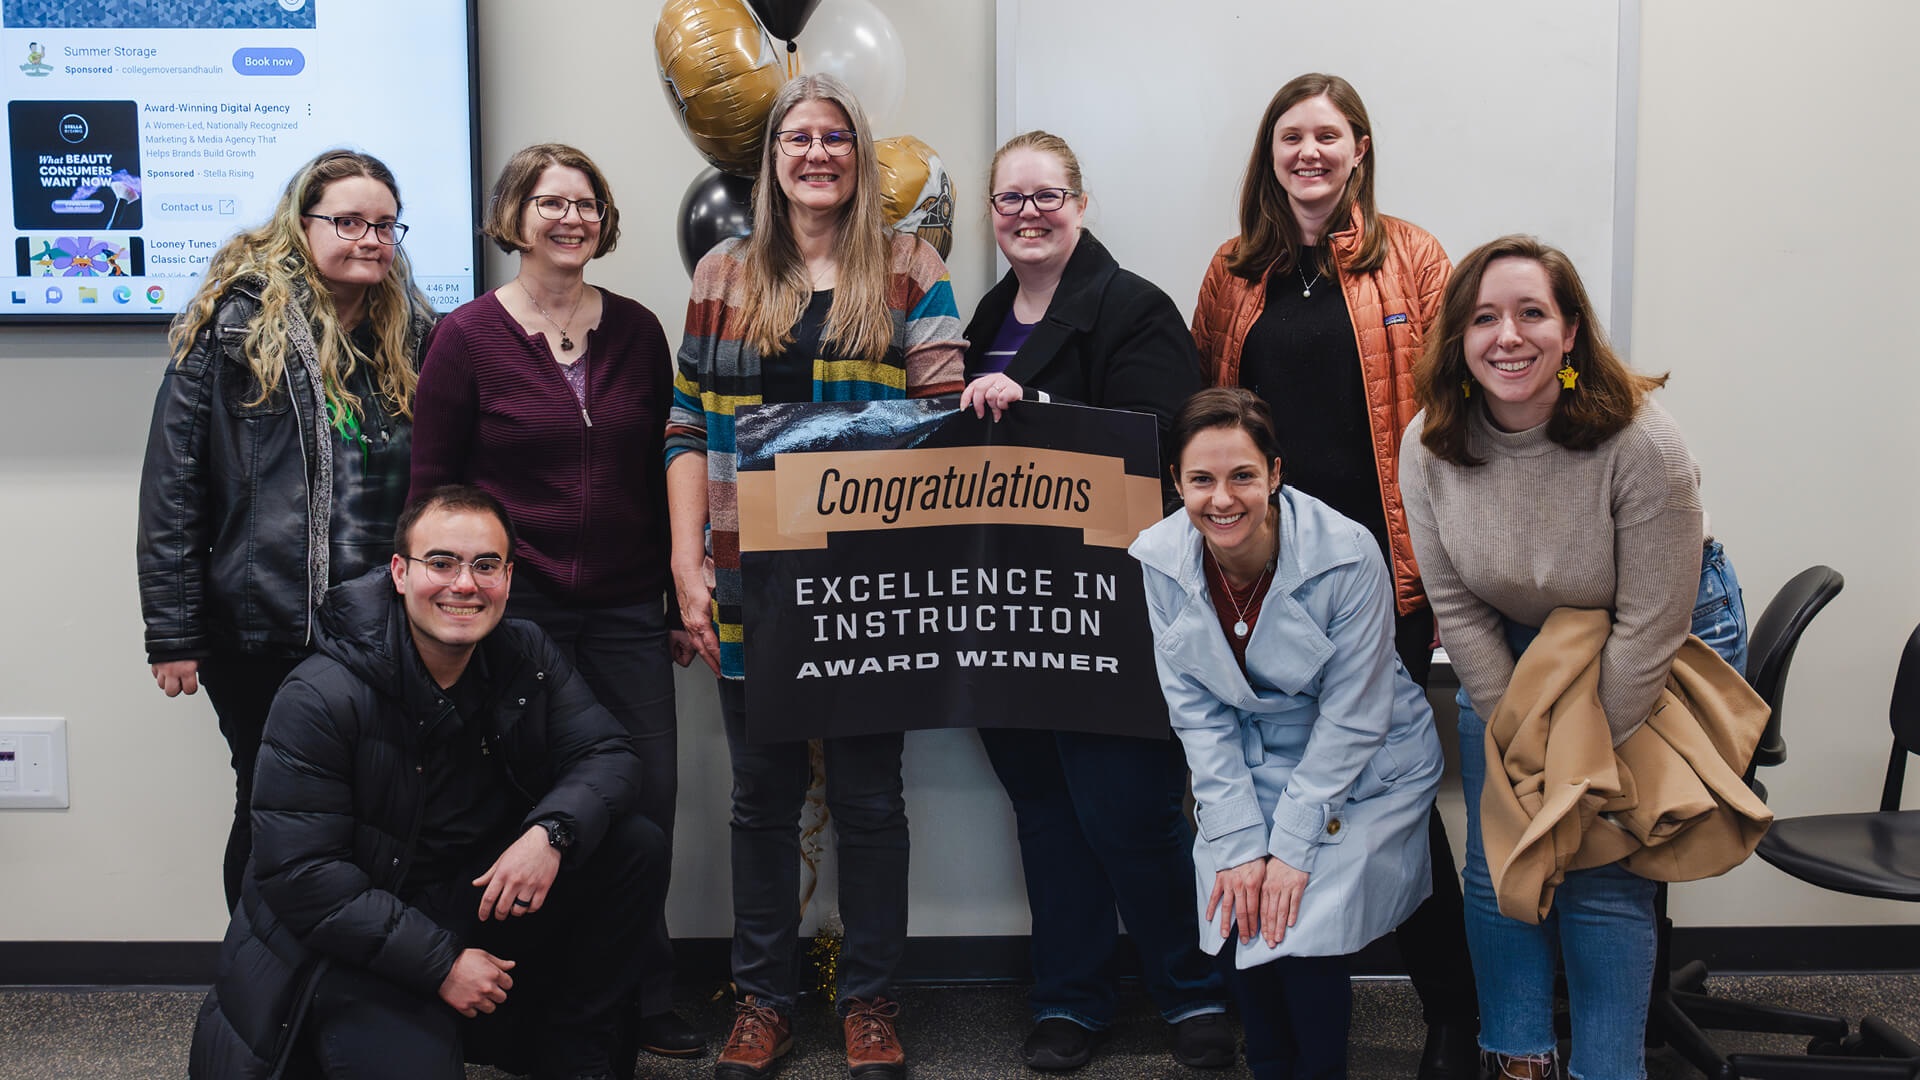 Haynes is wearing a striped cardigan, holding a sign that says, “Congratulations Excellence in Instruction Award Winner,” surrounded by a group of seven people — friends and family. Black, gold and white balloons are visible behind them.